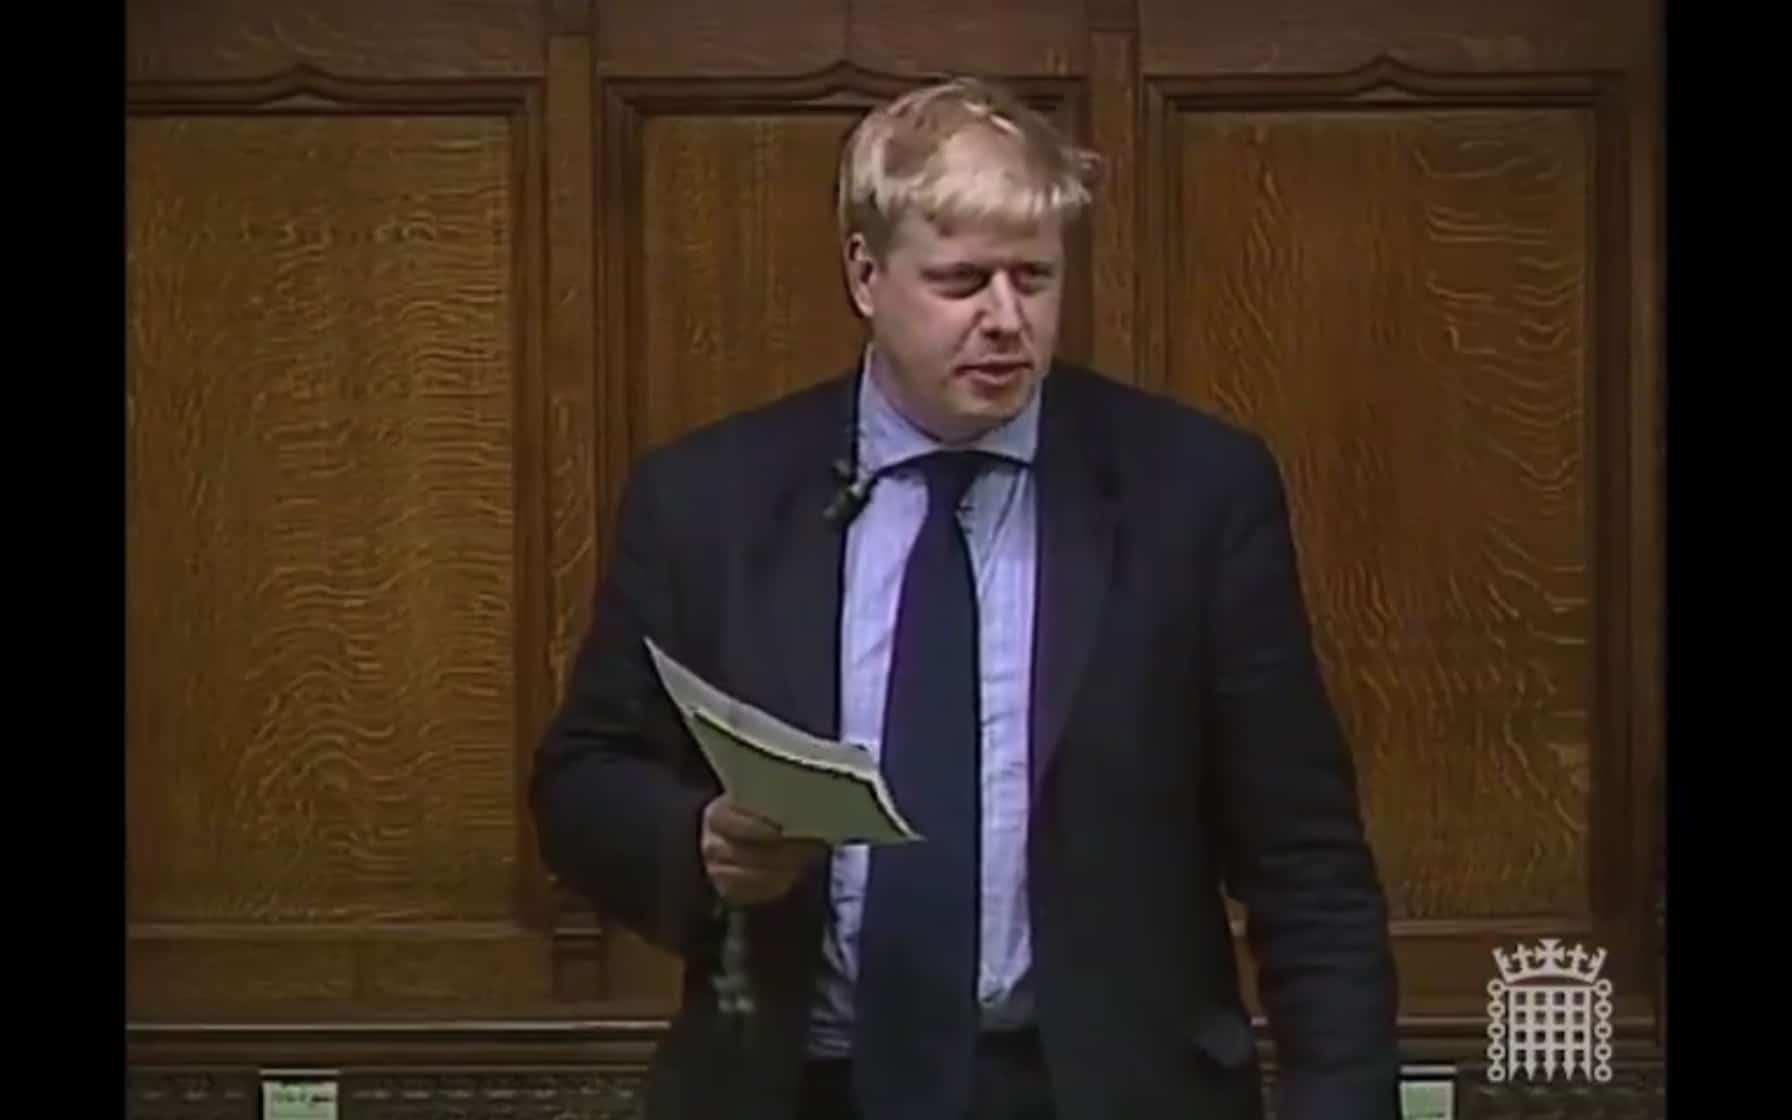 Flashback to when a young Boris Johnson called for a break up of the “monolithic, monopolistic” NHS